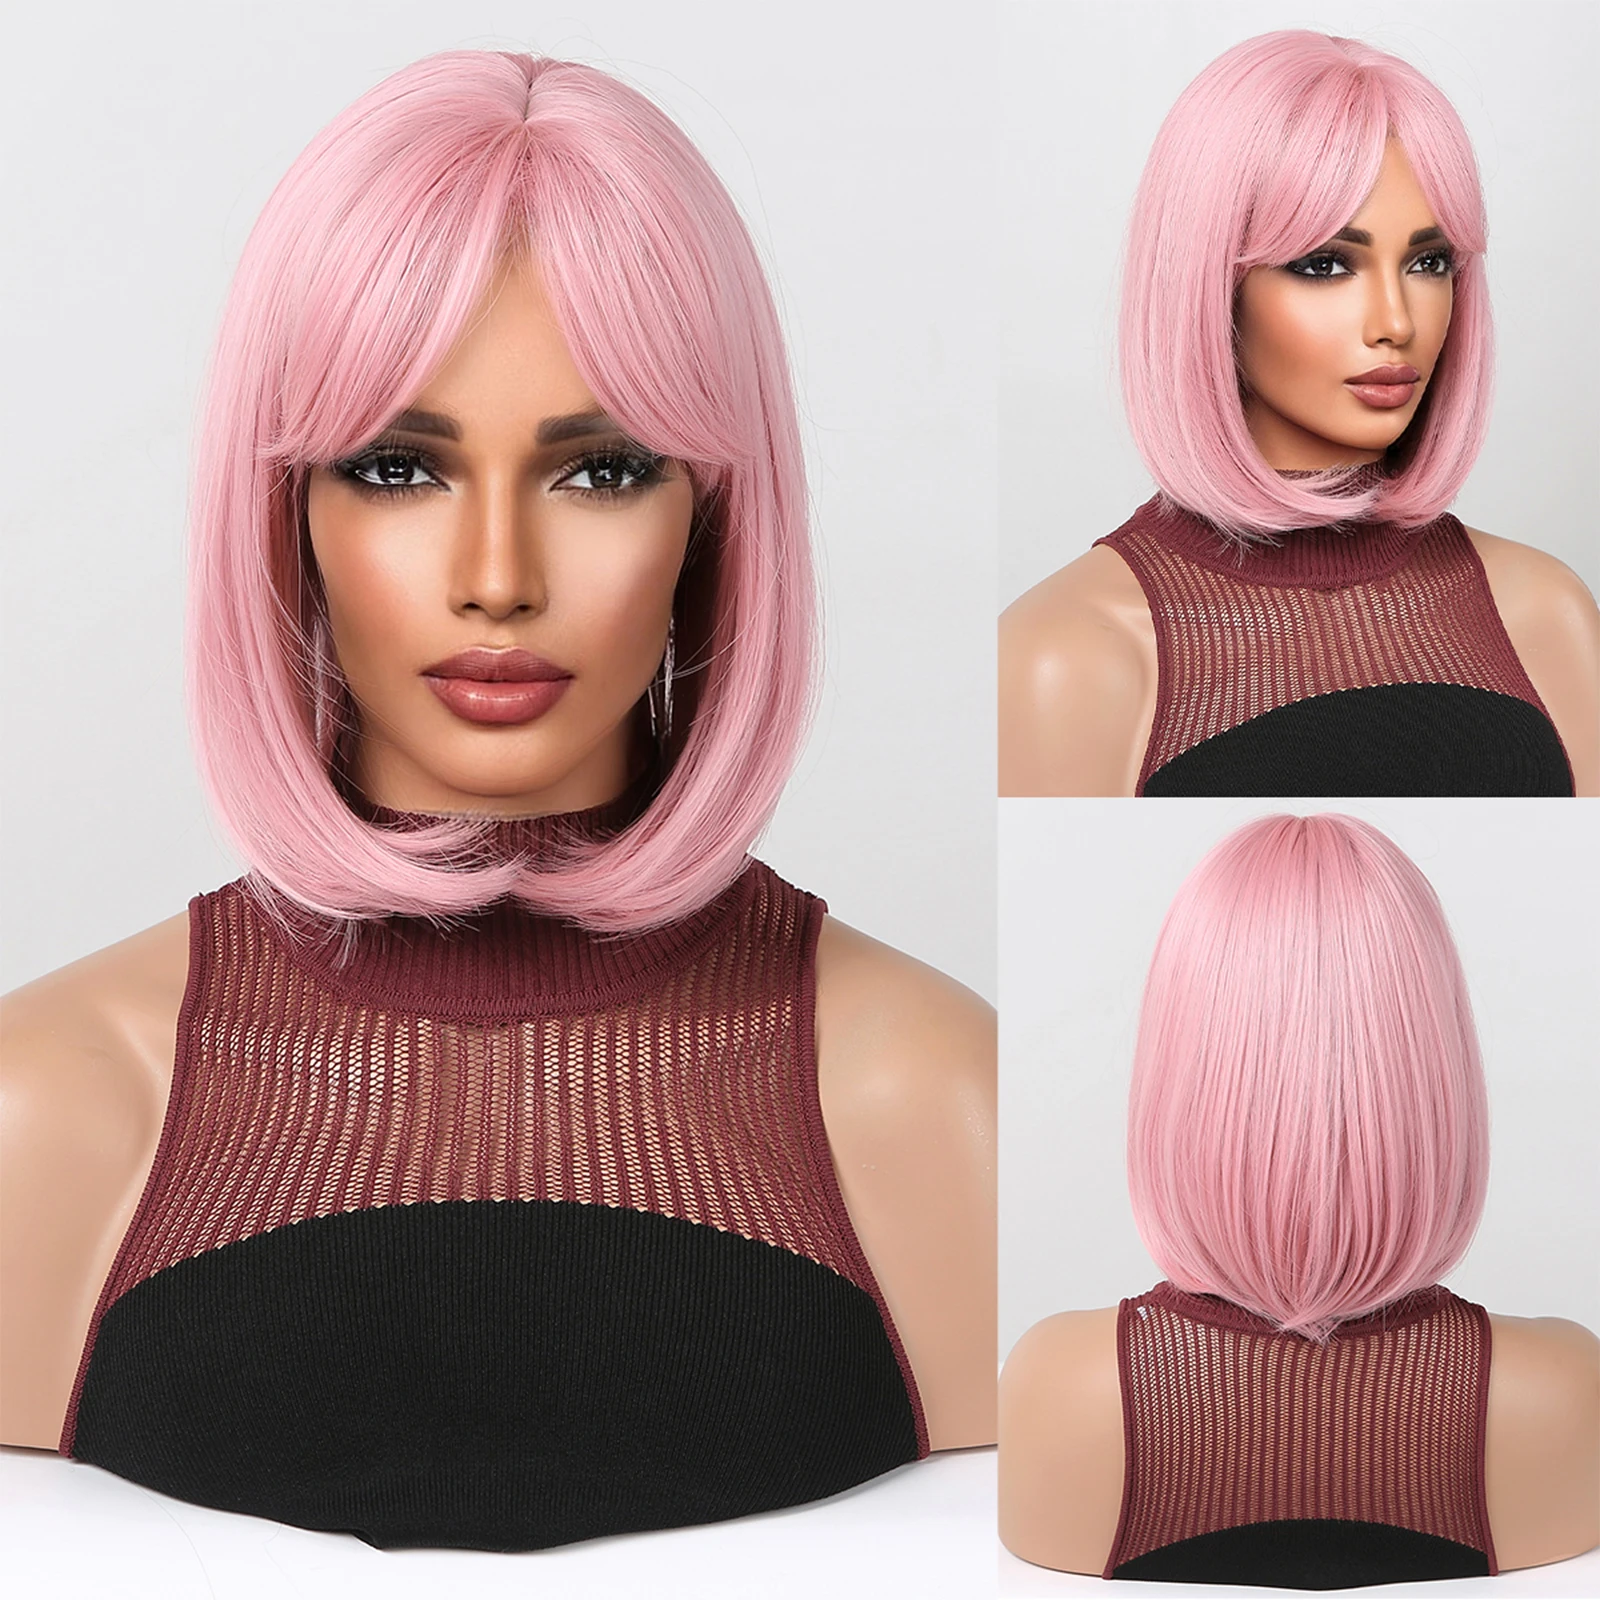 EASIHAIR Pink Wig with Bangs Short Straight Bob Synthetic Wigs Hair for Women Cosplay Party Colorful Costume Wigs Heat Resistant